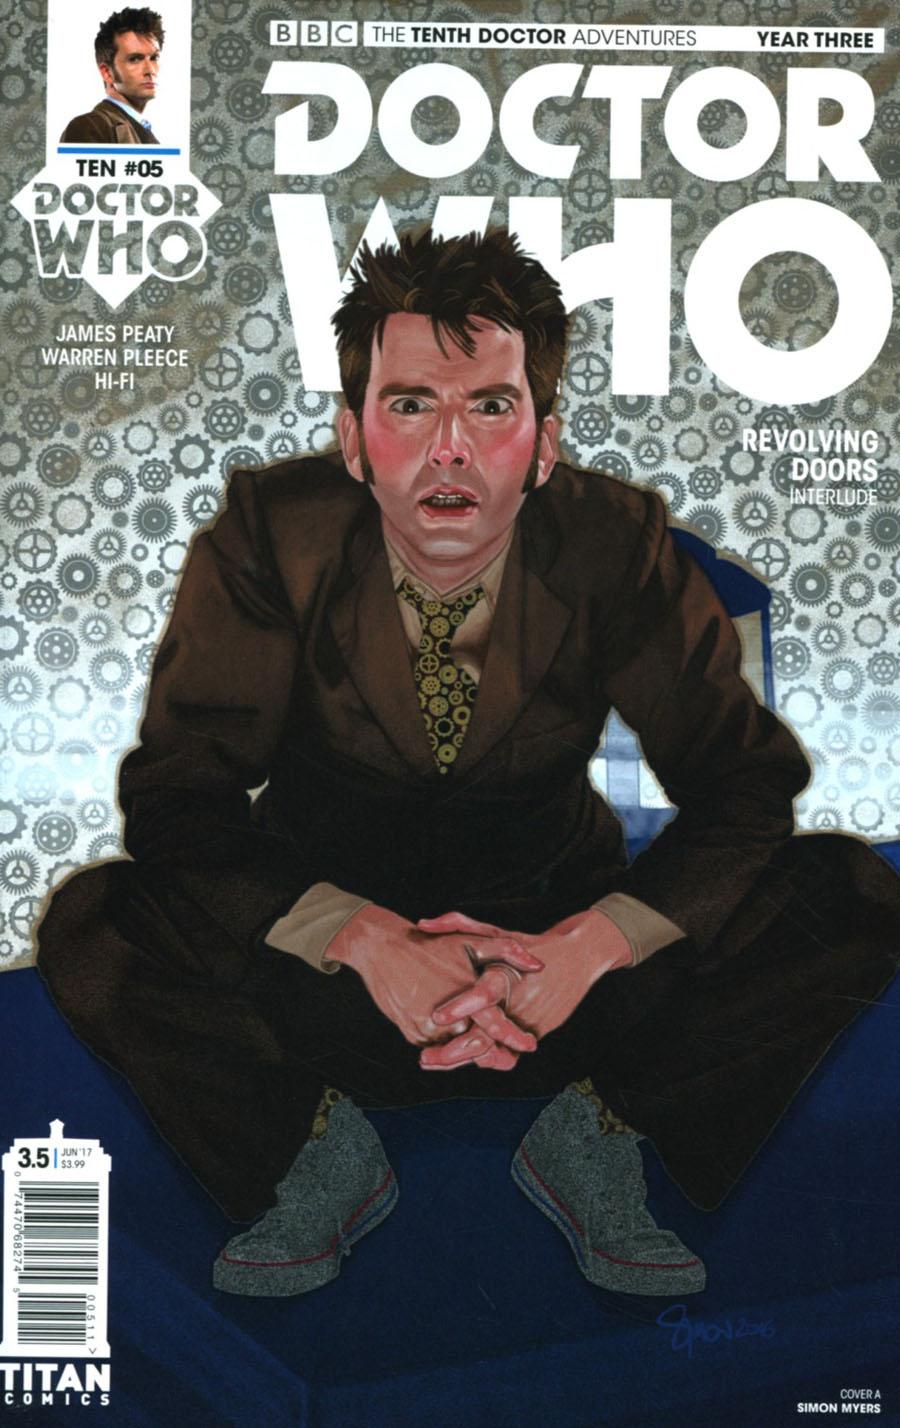 Doctor Who 10th Doctor Year Three Vol. 1 #5